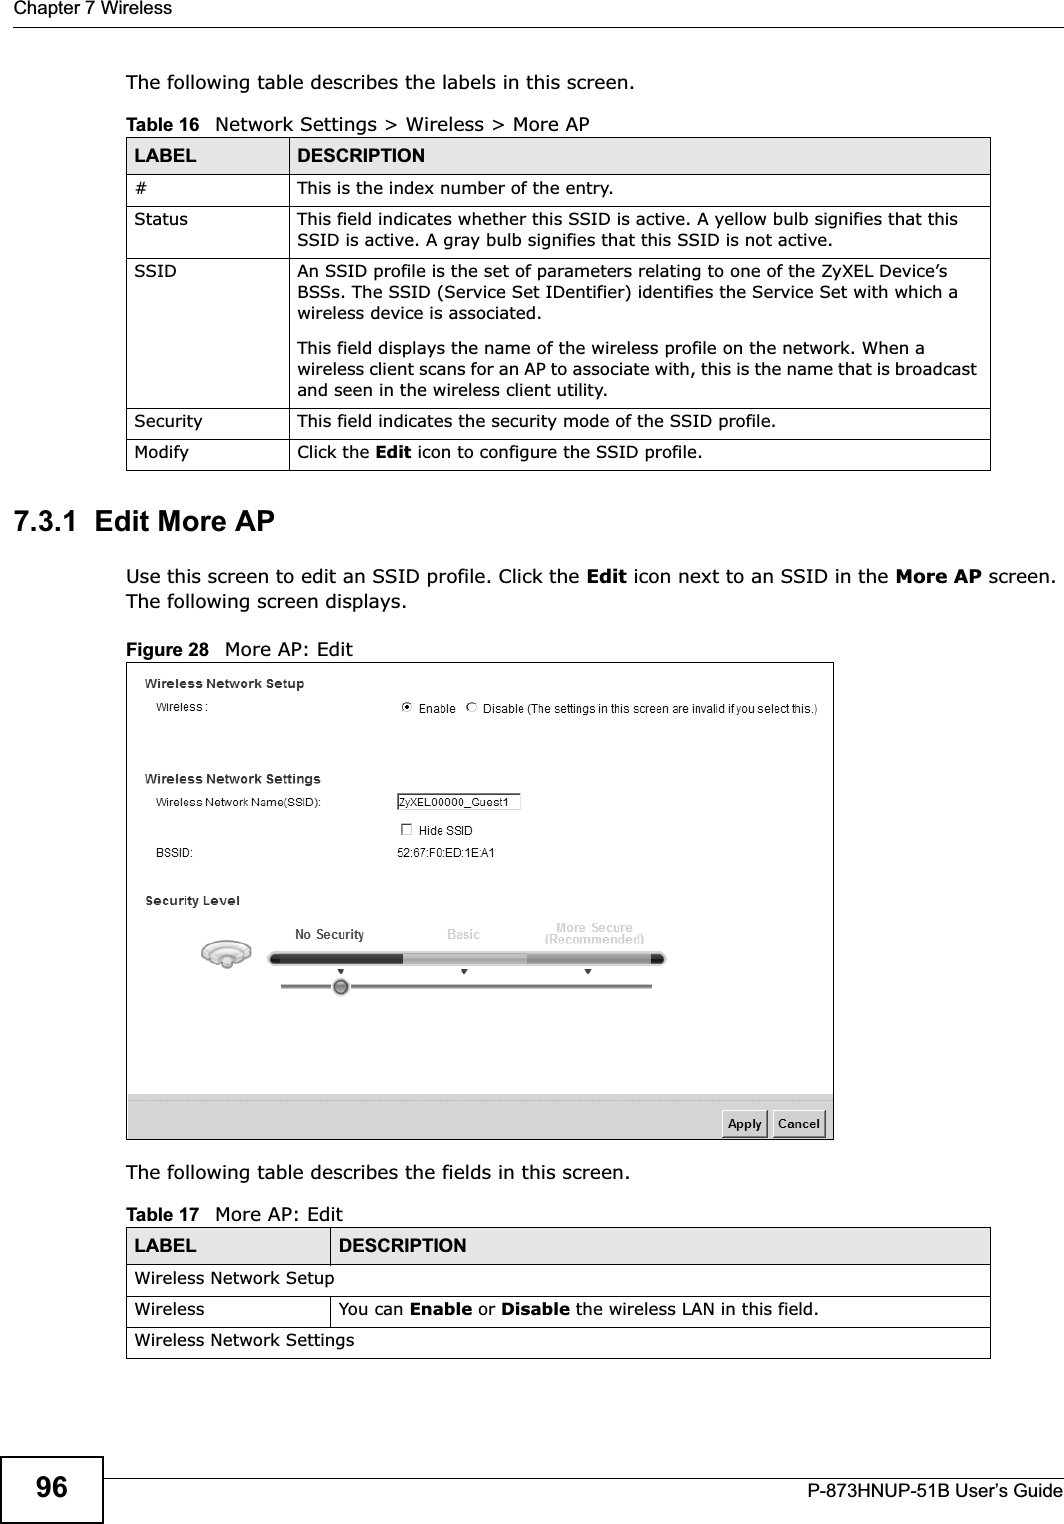 Chapter 7 WirelessP-873HNUP-51B User’s Guide96The following table describes the labels in this screen.7.3.1  Edit More AP Use this screen to edit an SSID profile. Click the Edit icon next to an SSID in the More AP screen. The following screen displays.Figure 28   More AP: EditThe following table describes the fields in this screen.Table 16   Network Settings &gt; Wireless &gt; More APLABEL DESCRIPTION# This is the index number of the entry. Status This field indicates whether this SSID is active. A yellow bulb signifies that this SSID is active. A gray bulb signifies that this SSID is not active.SSID An SSID profile is the set of parameters relating to one of the ZyXEL Device’s BSSs. The SSID (Service Set IDentifier) identifies the Service Set with which a wireless device is associated. This field displays the name of the wireless profile on the network. When a wireless client scans for an AP to associate with, this is the name that is broadcast and seen in the wireless client utility.Security This field indicates the security mode of the SSID profile.Modify Click the Edit icon to configure the SSID profile.Table 17   More AP: EditLABEL DESCRIPTIONWireless Network SetupWireless You can Enable or Disable the wireless LAN in this field.Wireless Network Settings